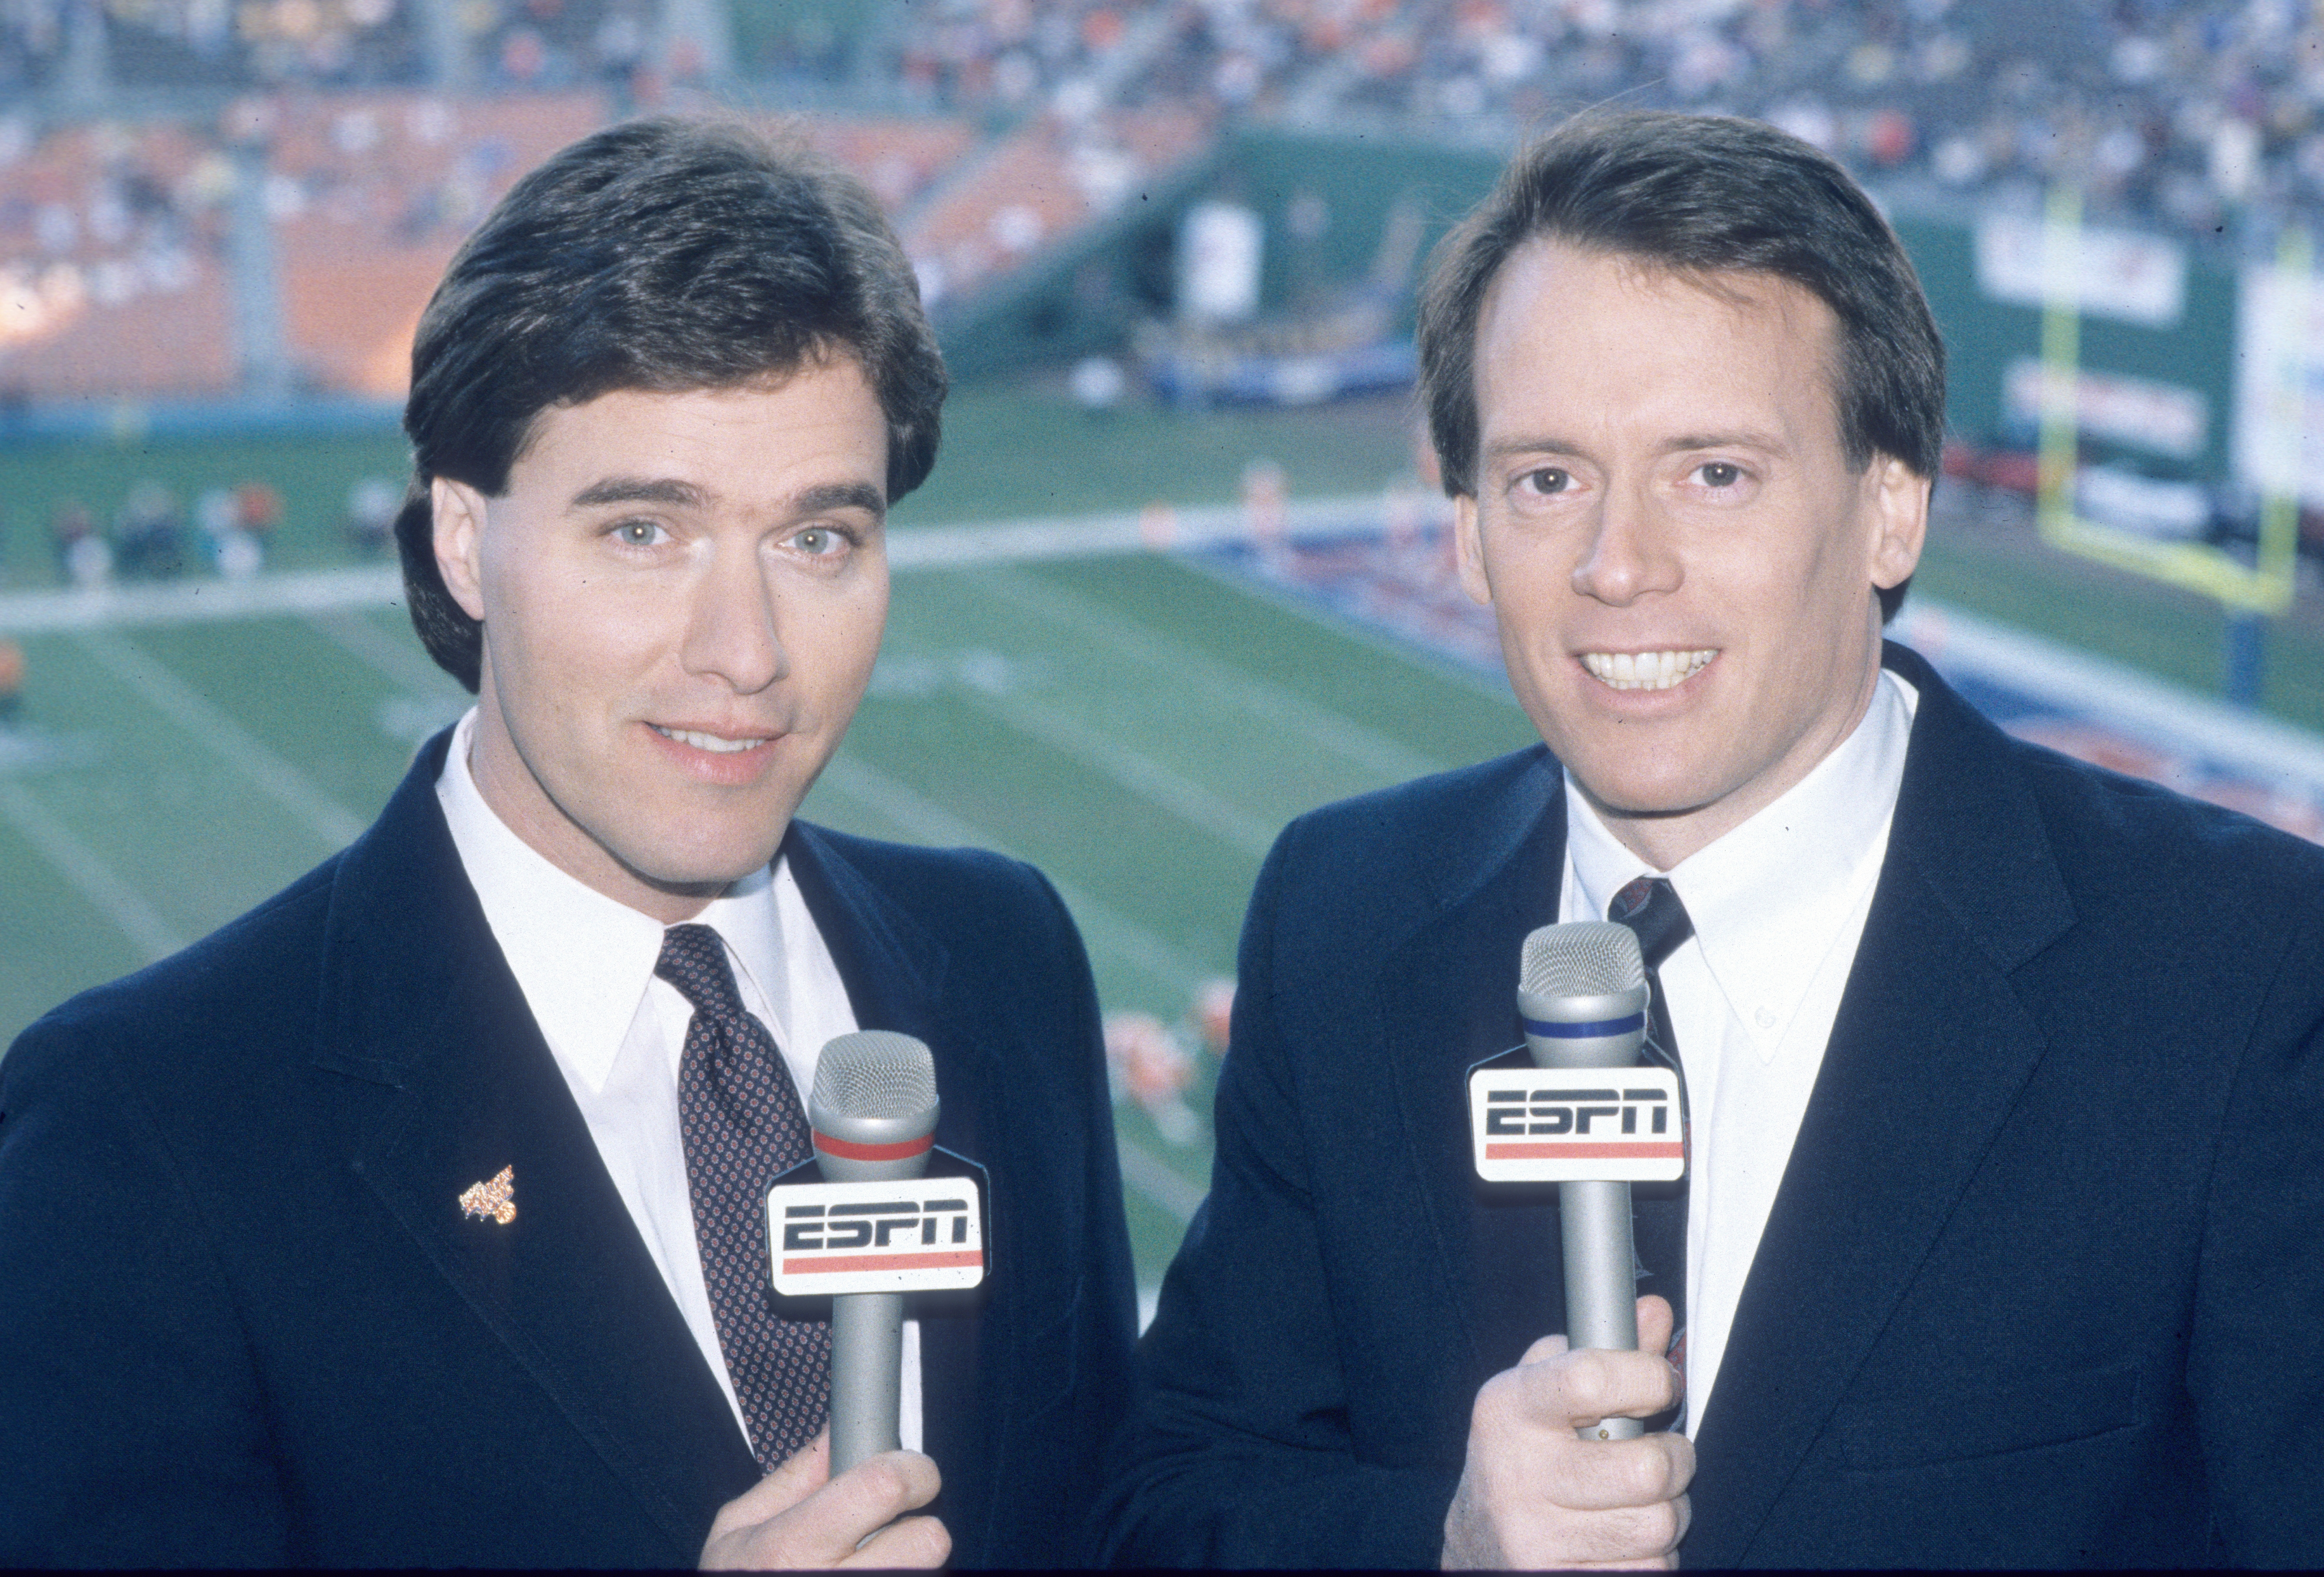 Bob Carpenter (left) and Kevin Kiley are shown commentating from the 1988 Holiday Bowl. (Kirk Schlea)